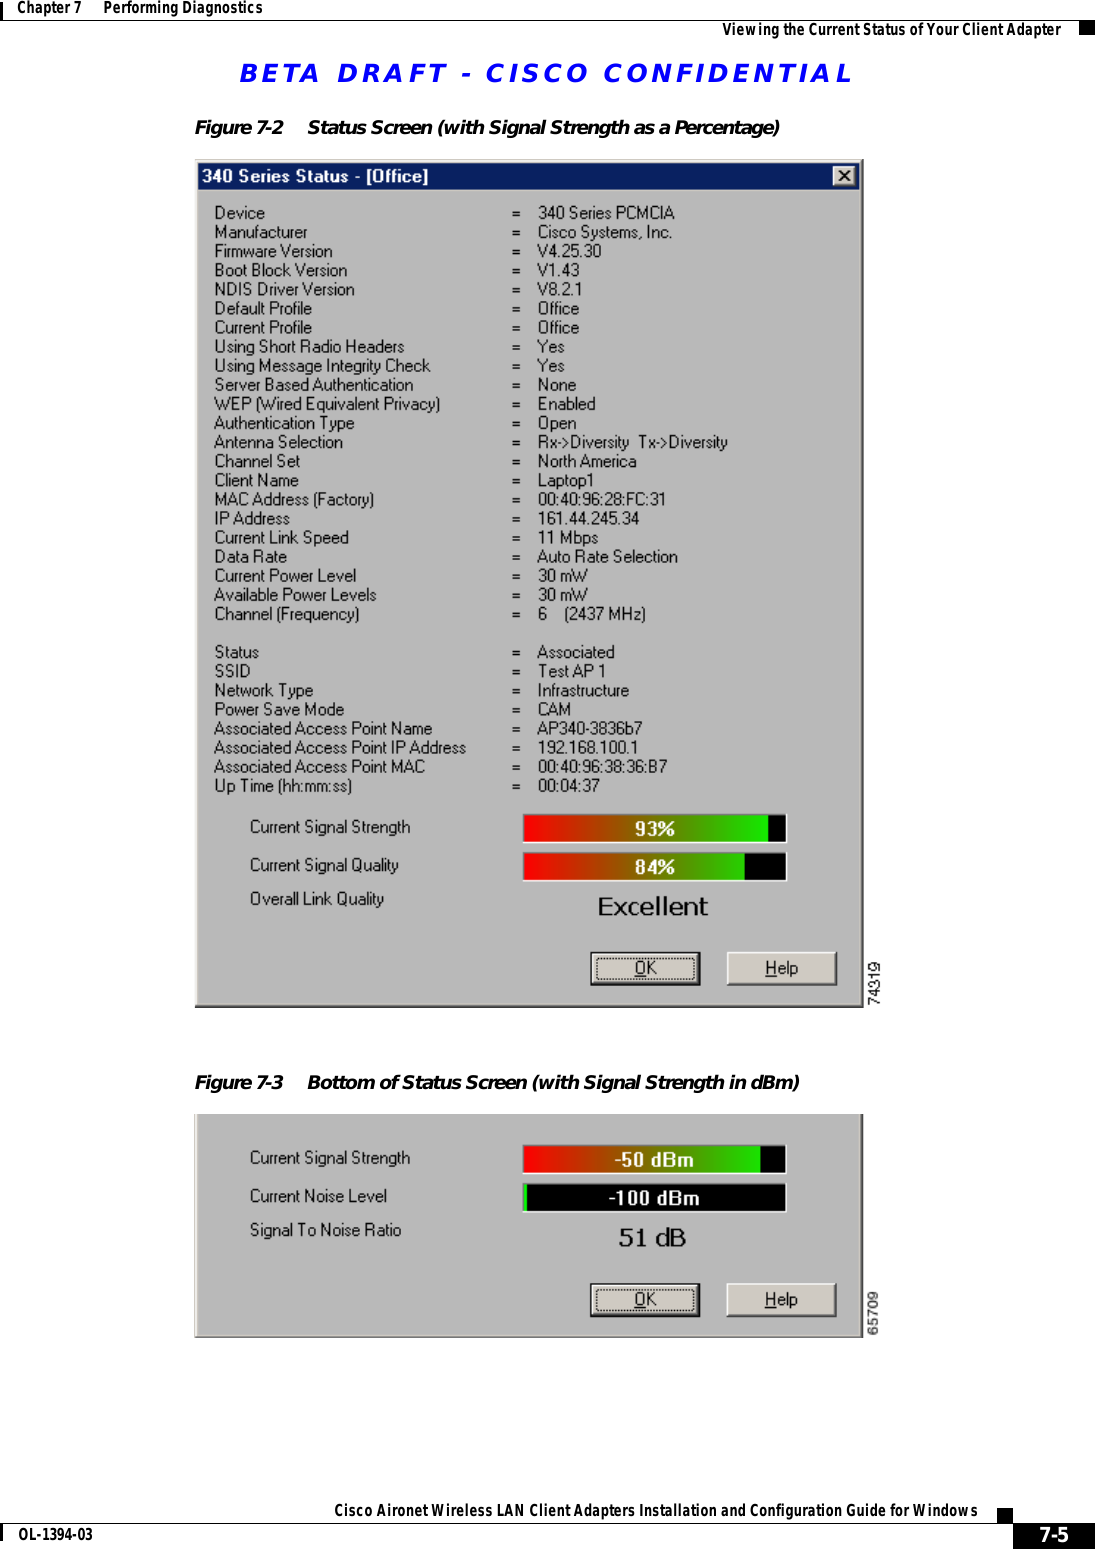 BETA DRAFT - CISCO CONFIDENTIAL7-5Cisco Aironet Wireless LAN Client Adapters Installation and Configuration Guide for WindowsOL-1394-03Chapter 7      Performing Diagnostics Viewing the Current Status of Your Client AdapterFigure 7-2 Status Screen (with Signal Strength as a Percentage)Figure 7-3 Bottom of Status Screen (with Signal Strength in dBm)